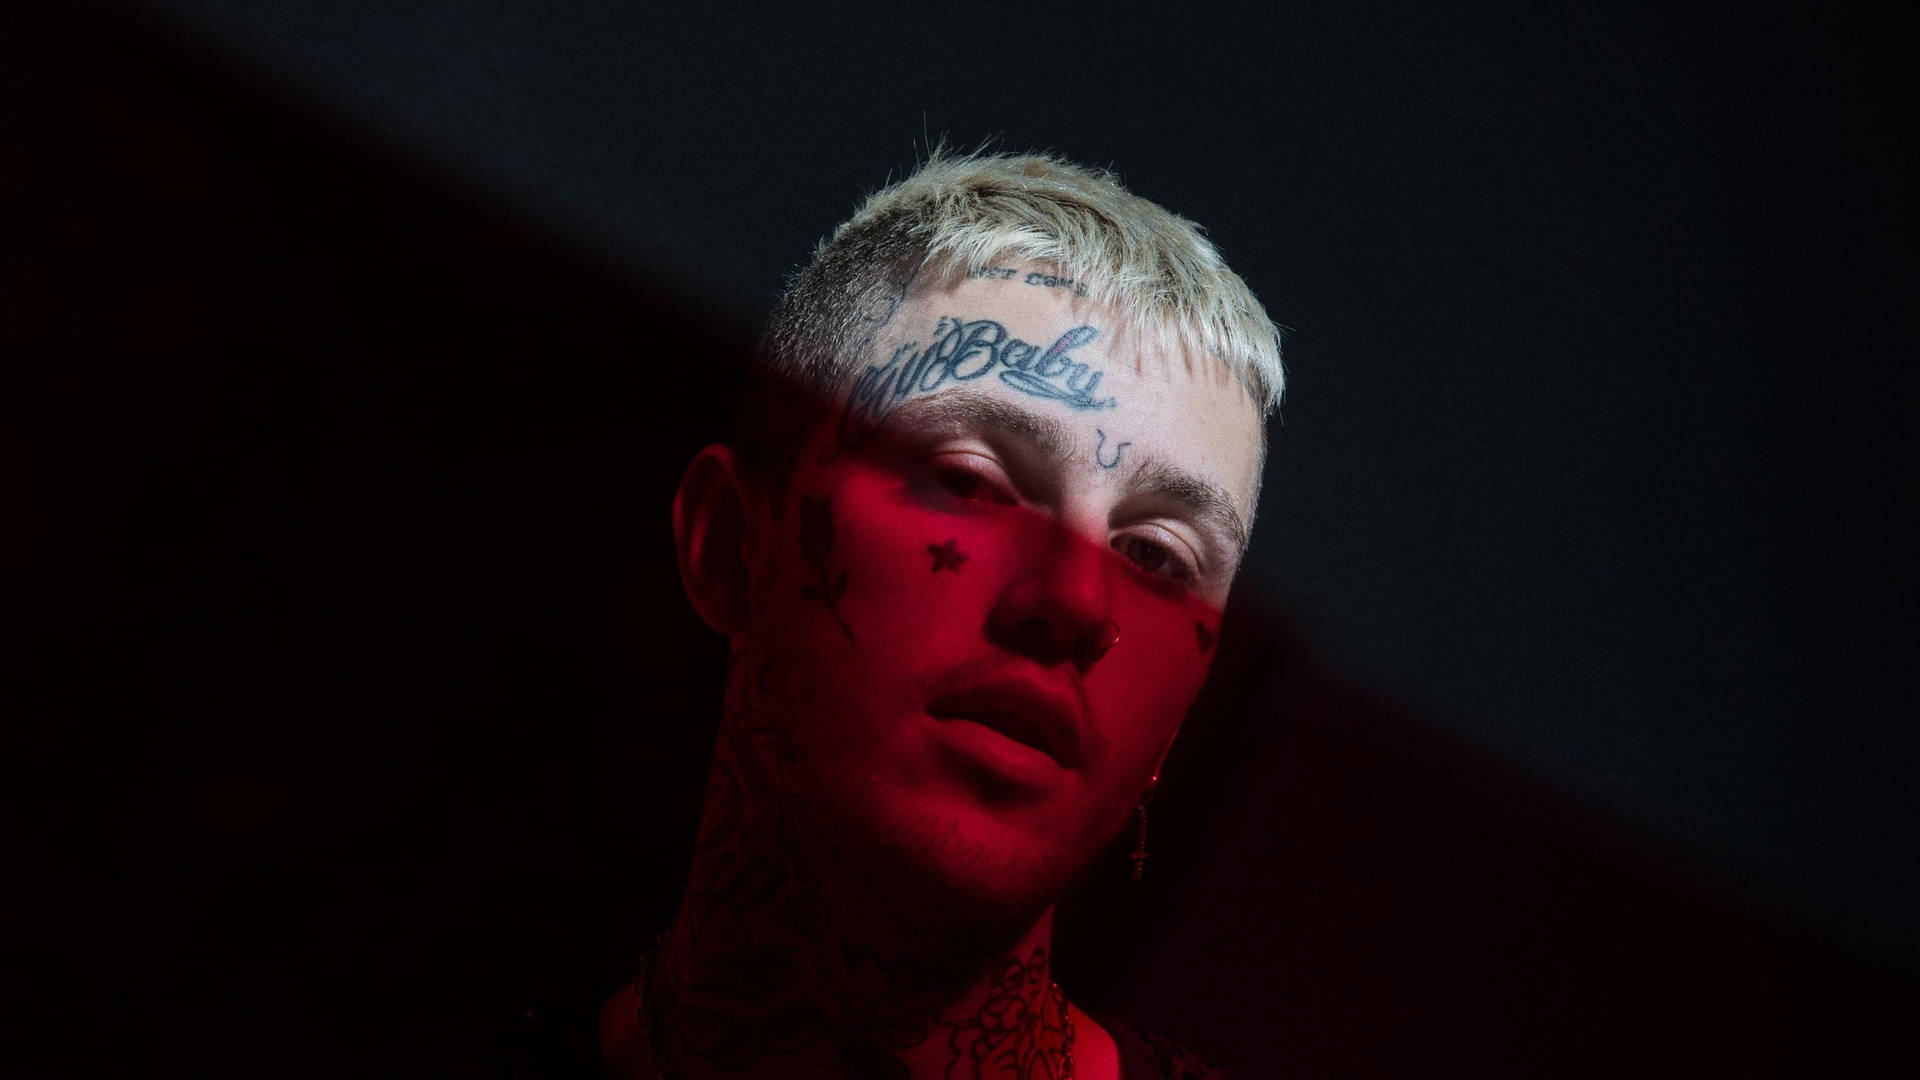 The late Lil Peep in a striking red aesthetic portrait Wallpaper